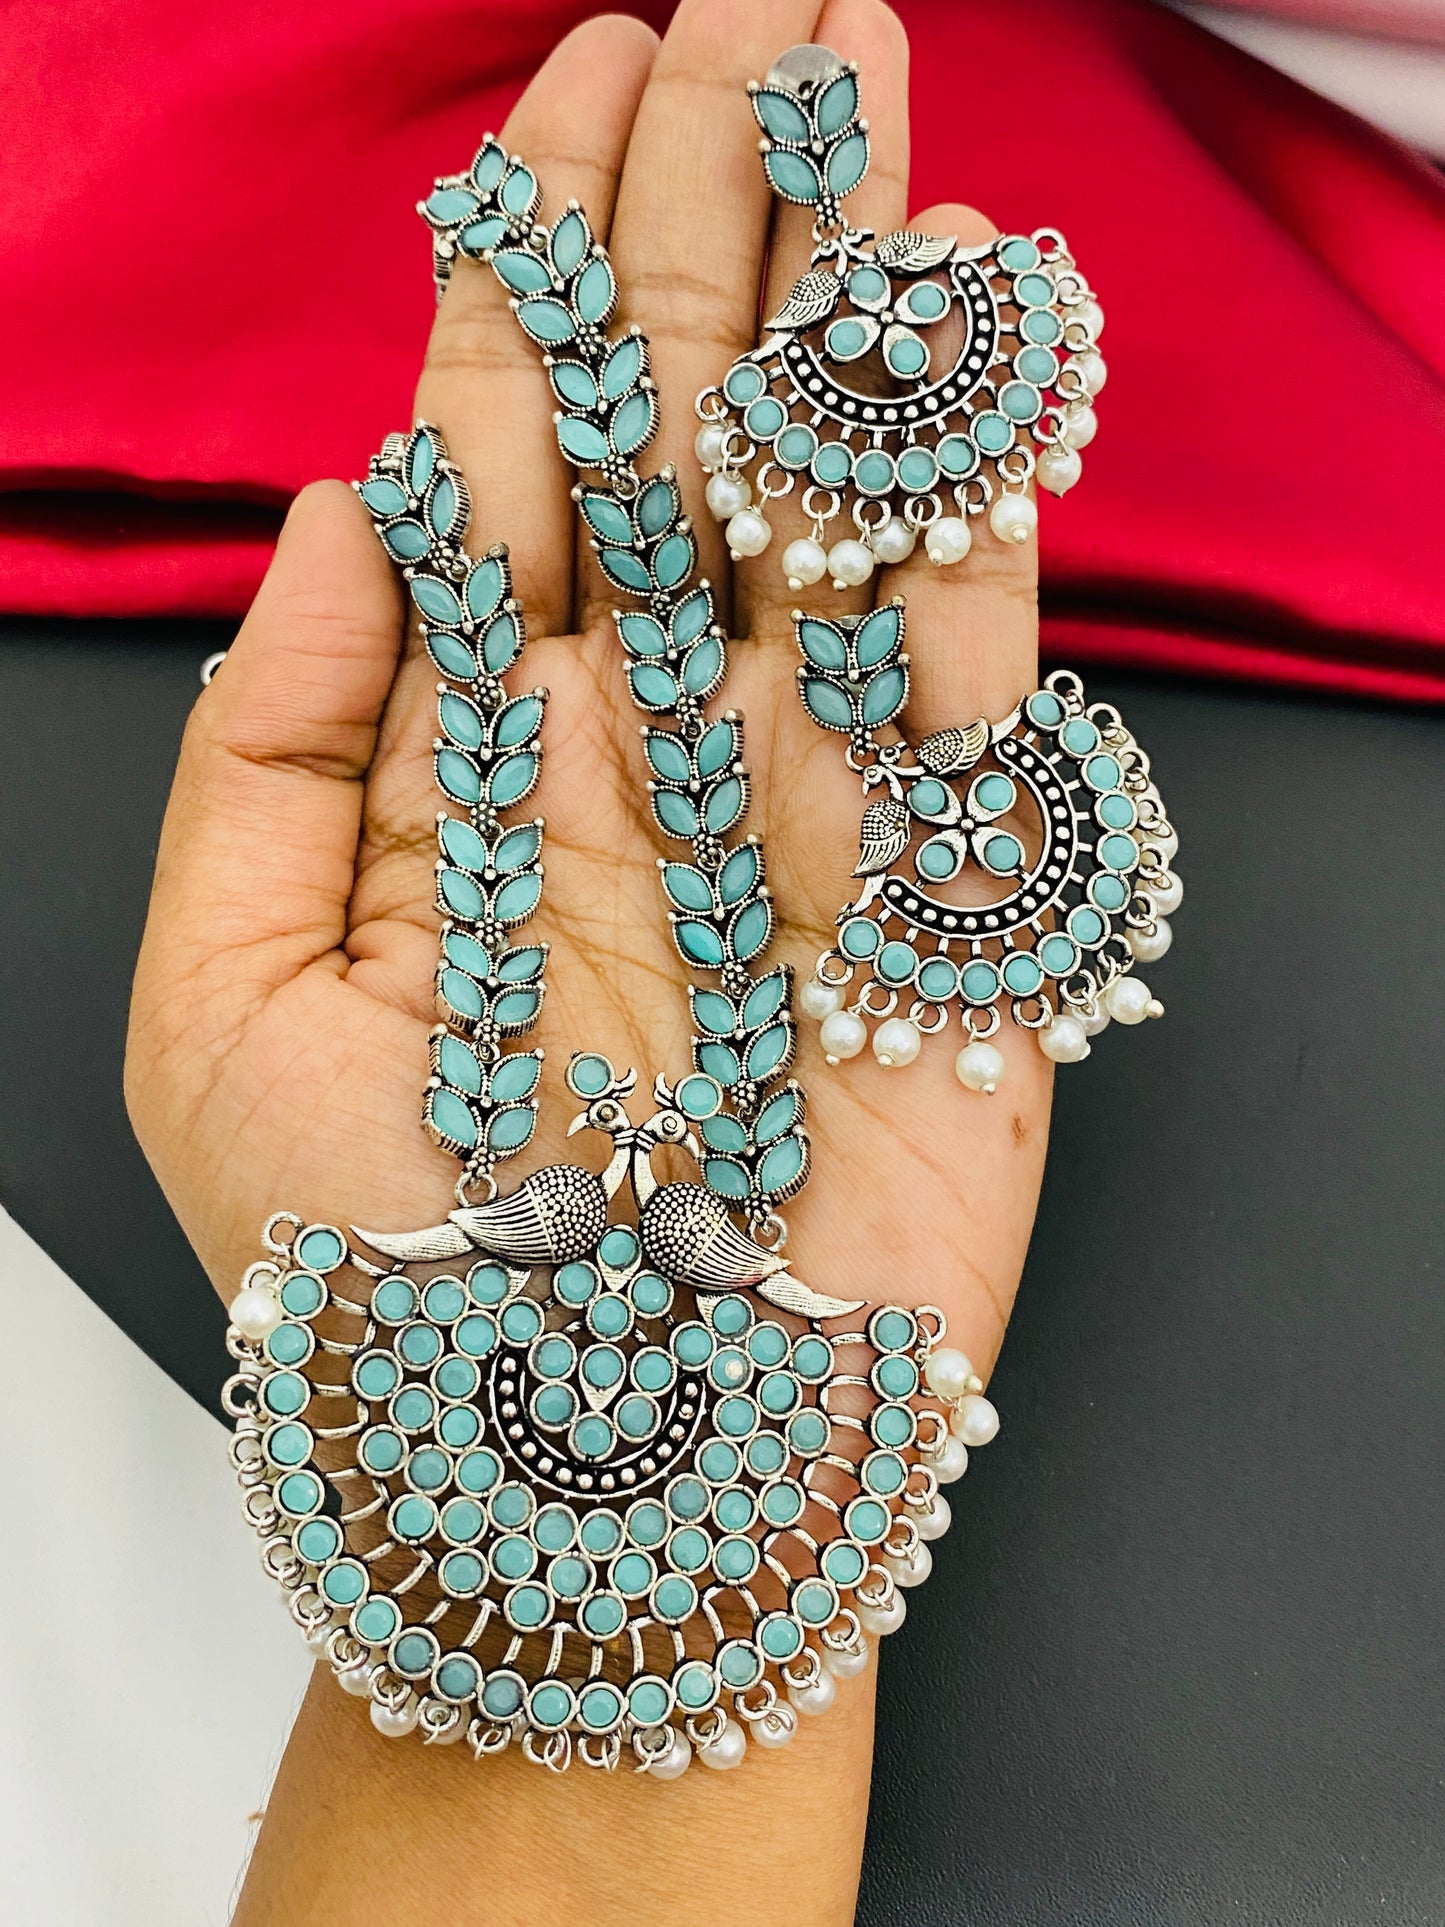 Exclusive Fashionable Oxidized Light Blue Heavy Pendant Necklace With Earrings